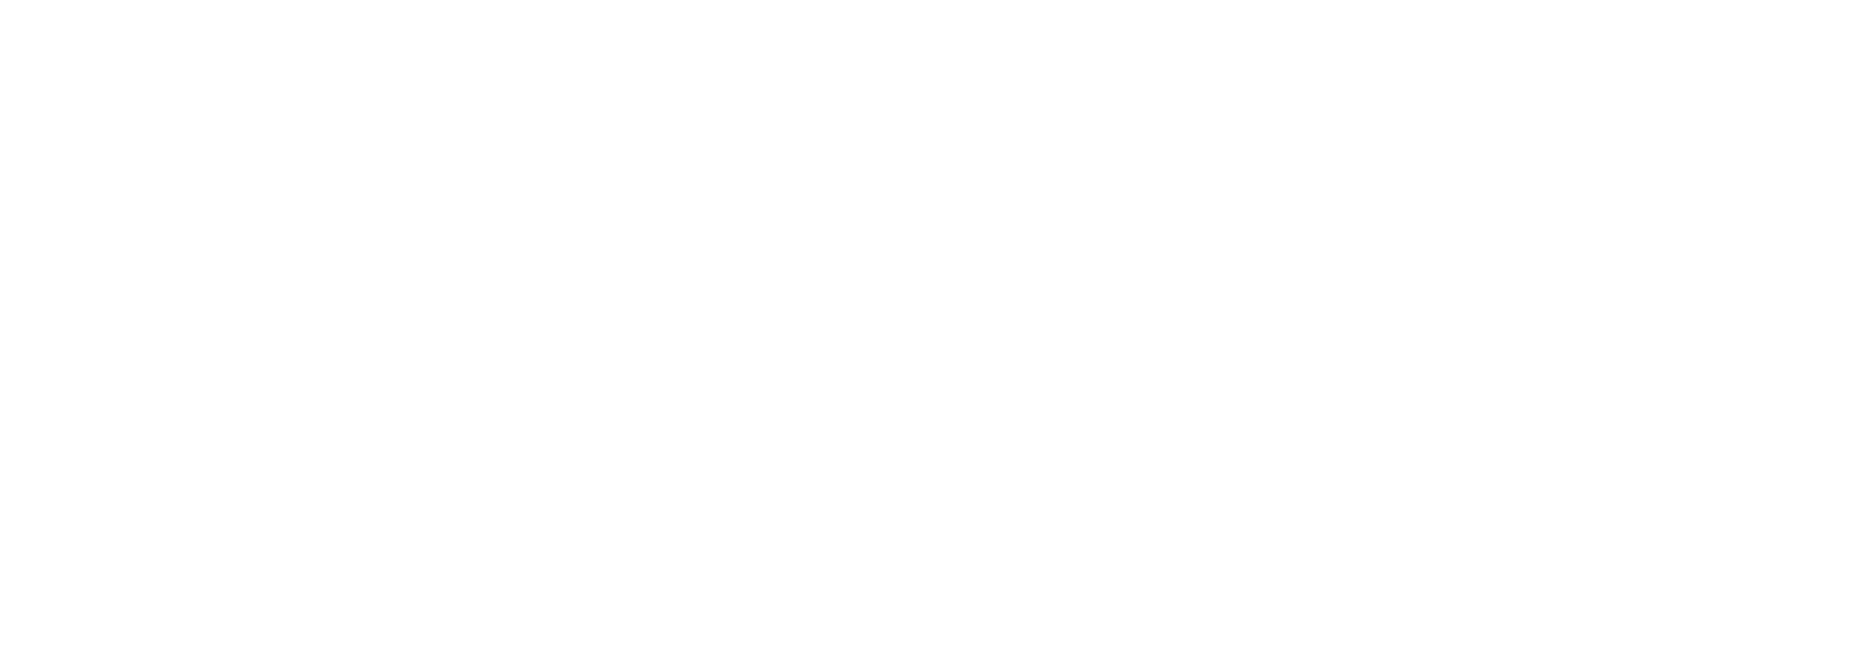 Schinnerl Solutions